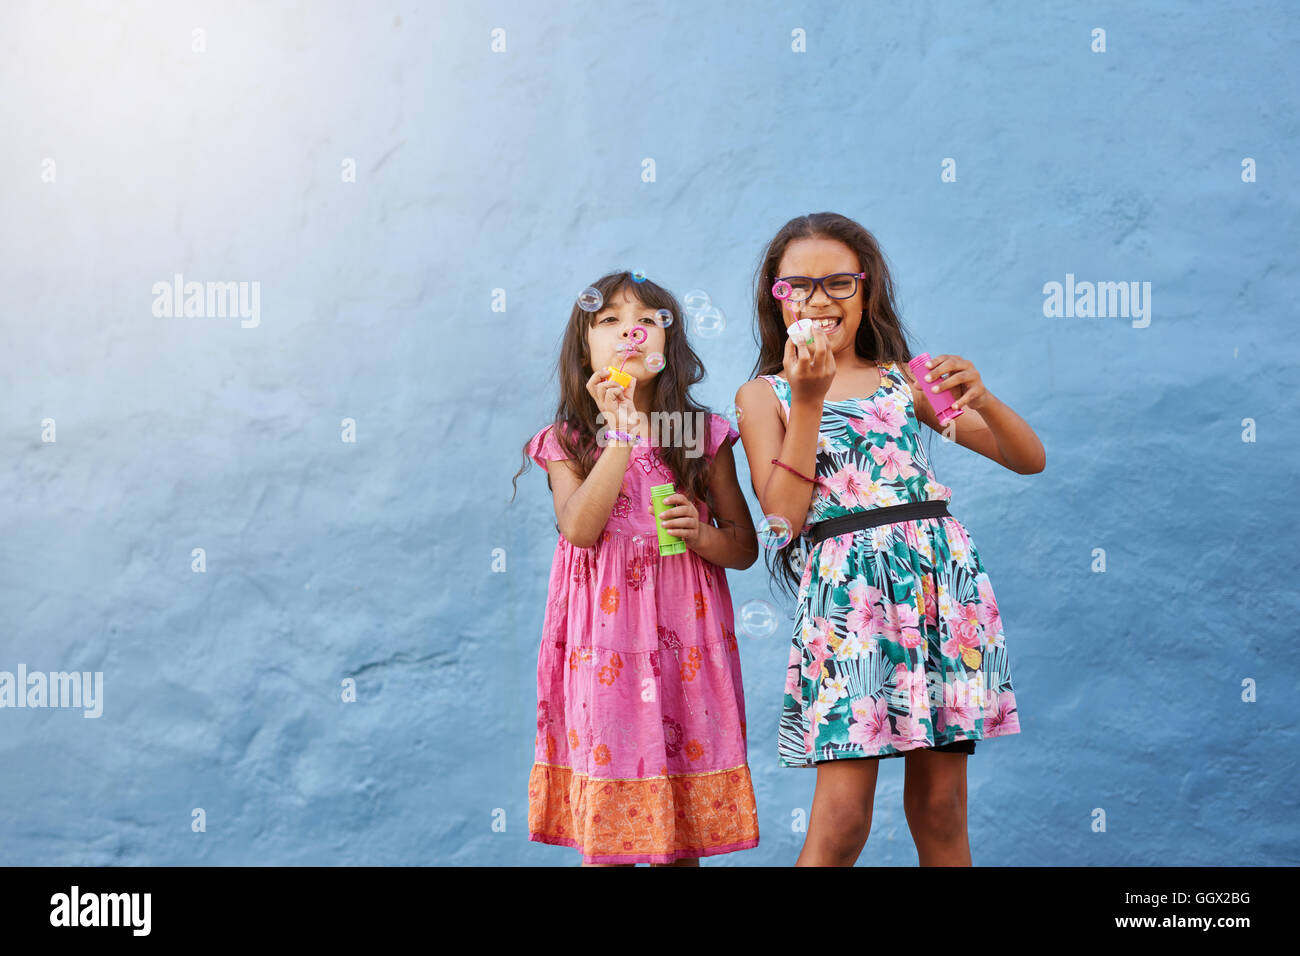 Portrait of cute little girls blowing soap bubbles. Two young girls playing against blue background. Stock Photo